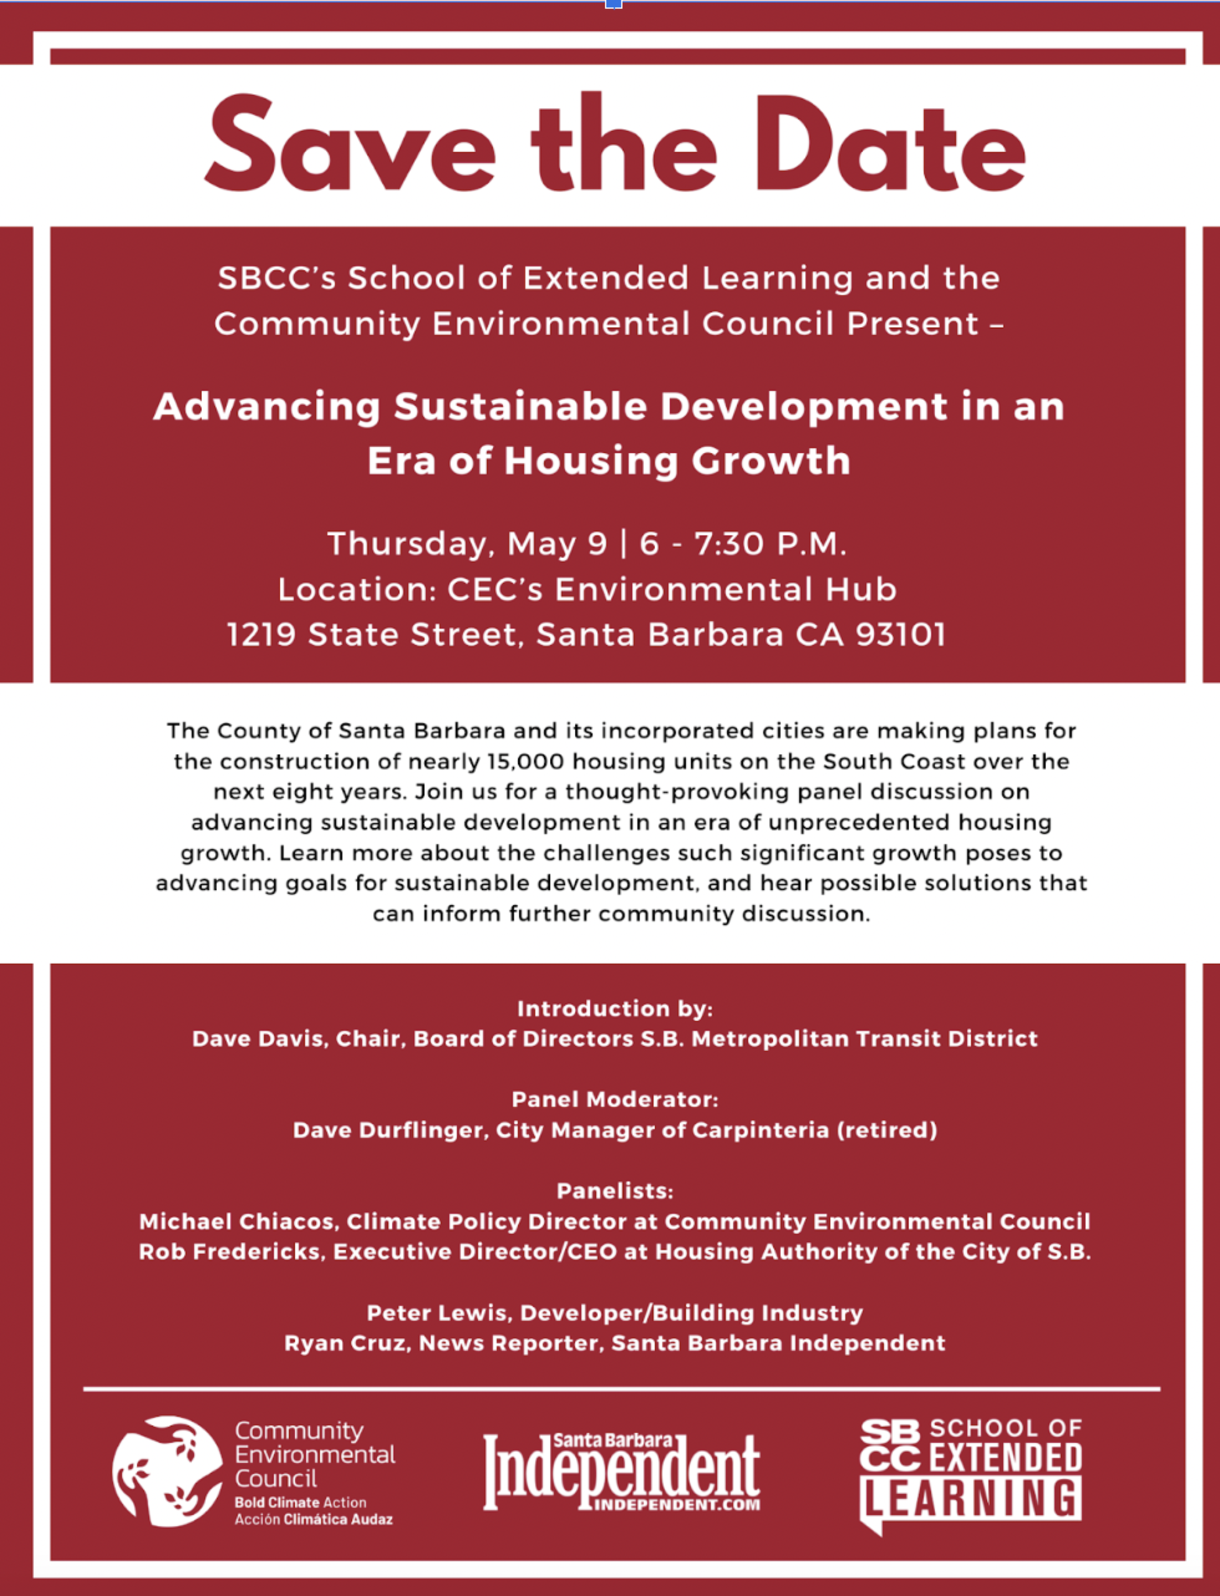 Save the date flyer for "Advancing Sustainable Development in an Era of Housing Growth" panel: Thursday, May 9 from 6 p.m. - 7:30 p.m. at the CEC Environmental Hub at 1219 State Street in Santa Barbara